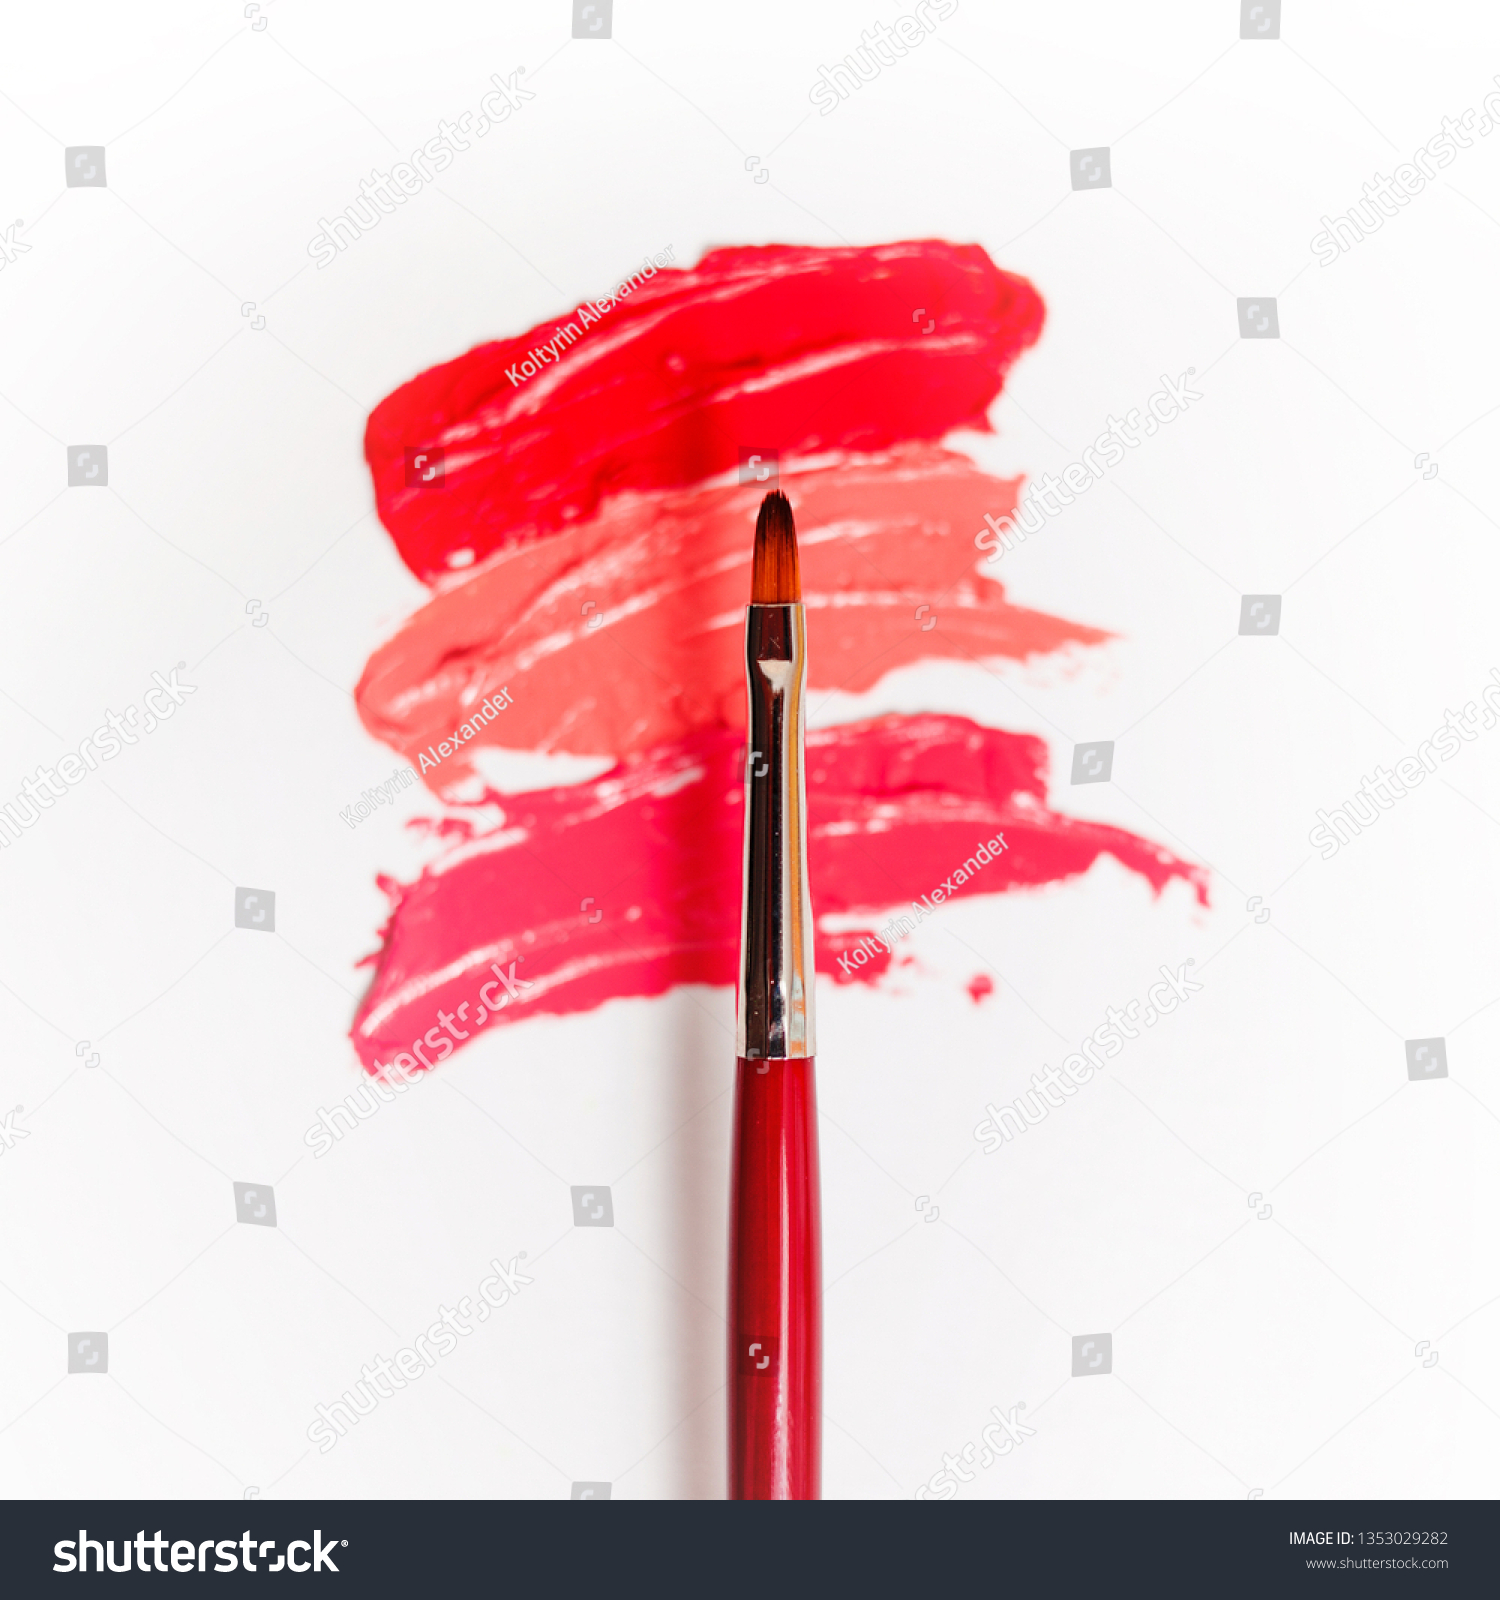 Lipstick and lip gloss, drops and strokes of different shades With brushes for application and shading, white background #1353029282